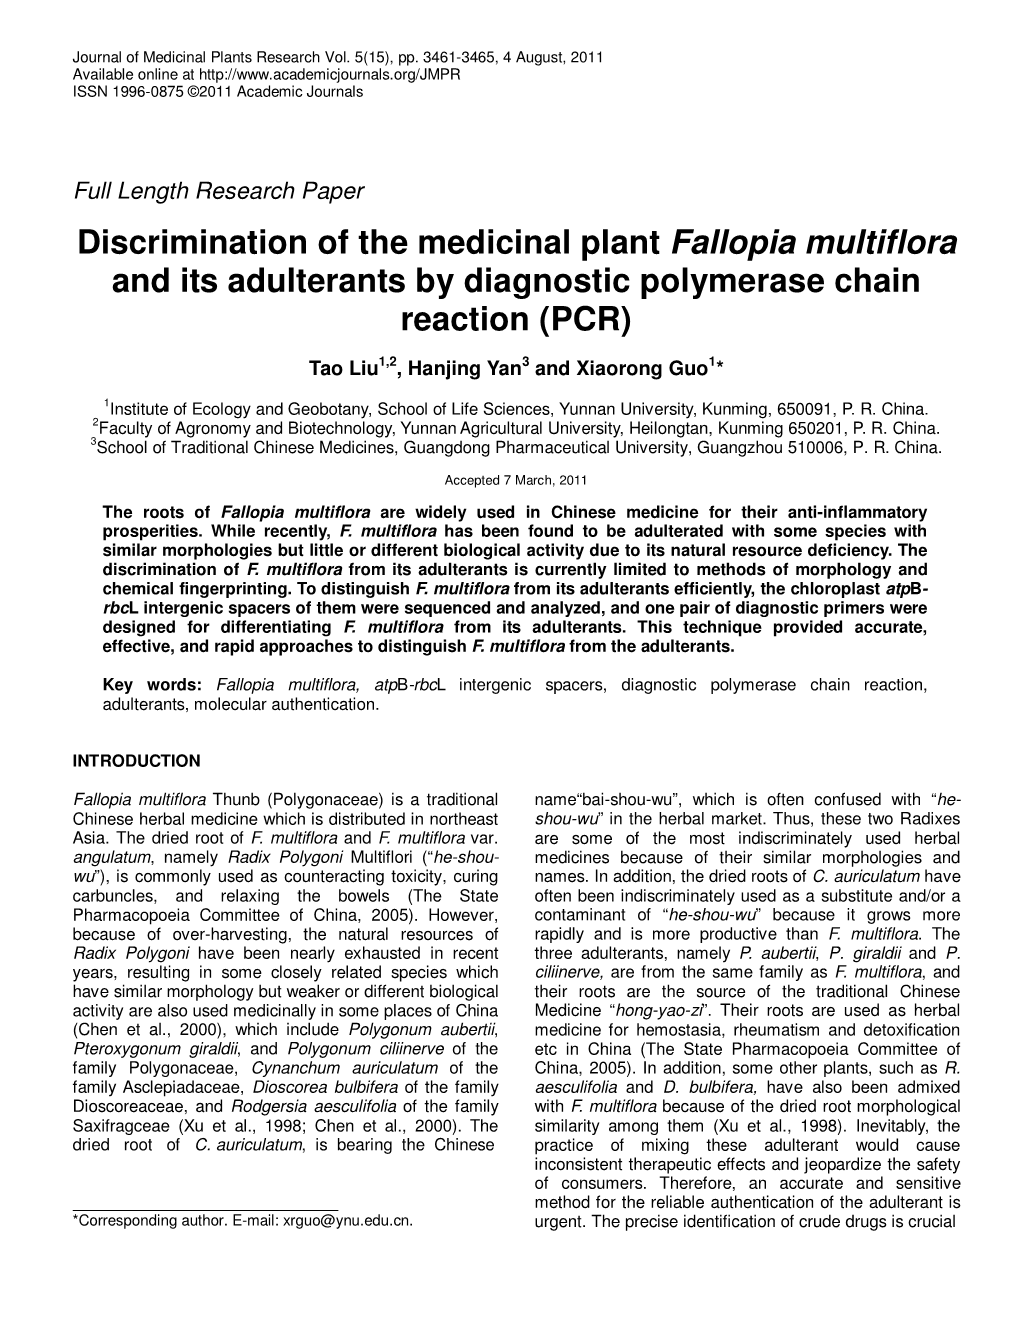 Discrimination of the Medicinal Plant Fallopia Multiflora and Its Adulterants by Diagnostic Polymerase Chain Reaction (PCR)